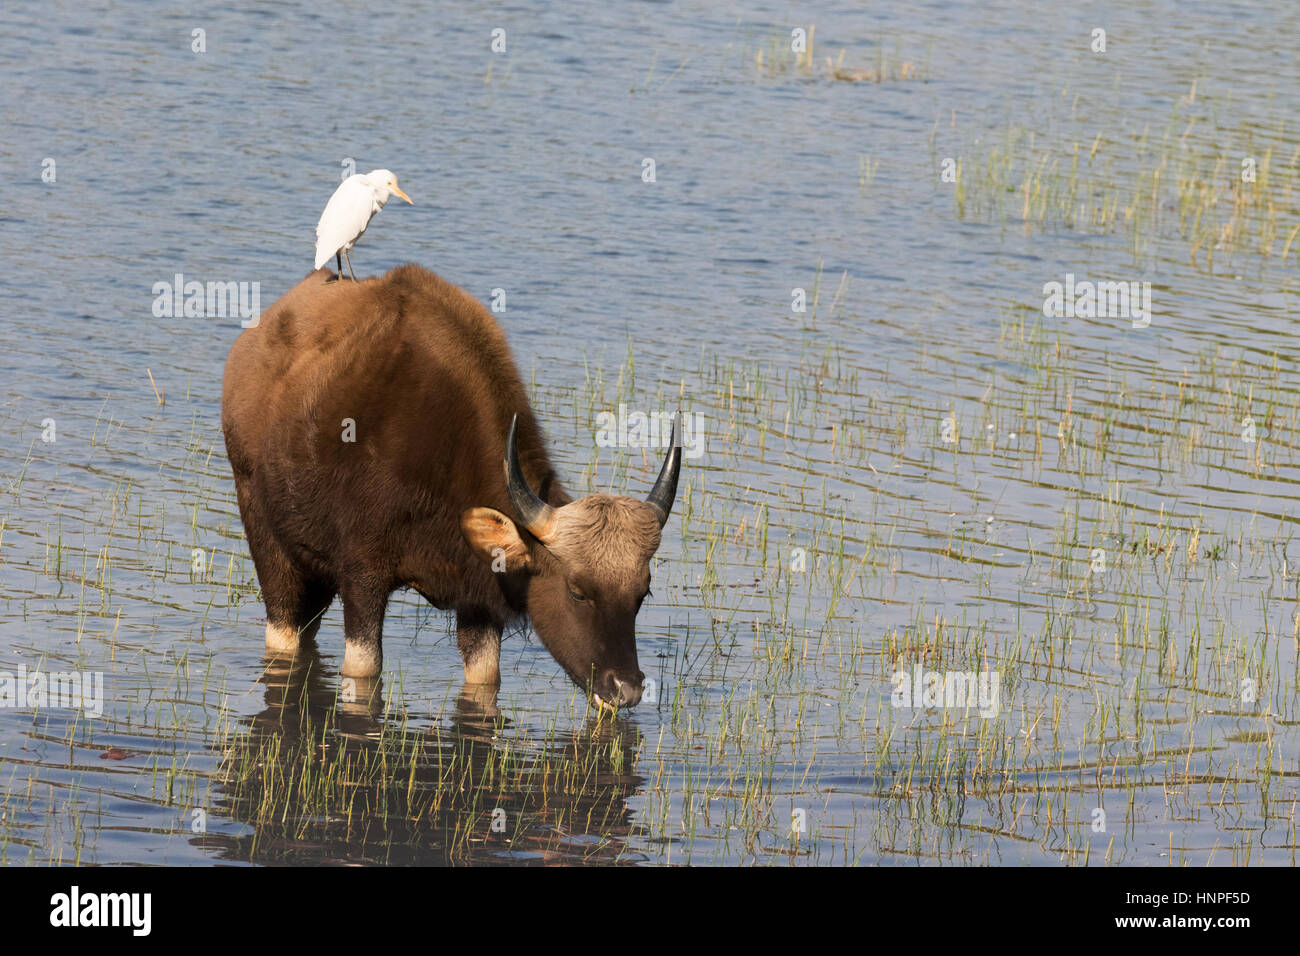 A Gaur, or Indian Bison, ( Bos Gaurus ), standing in water with a cattle egret on its back, Tadoba National Park, India, Asia Stock Photo